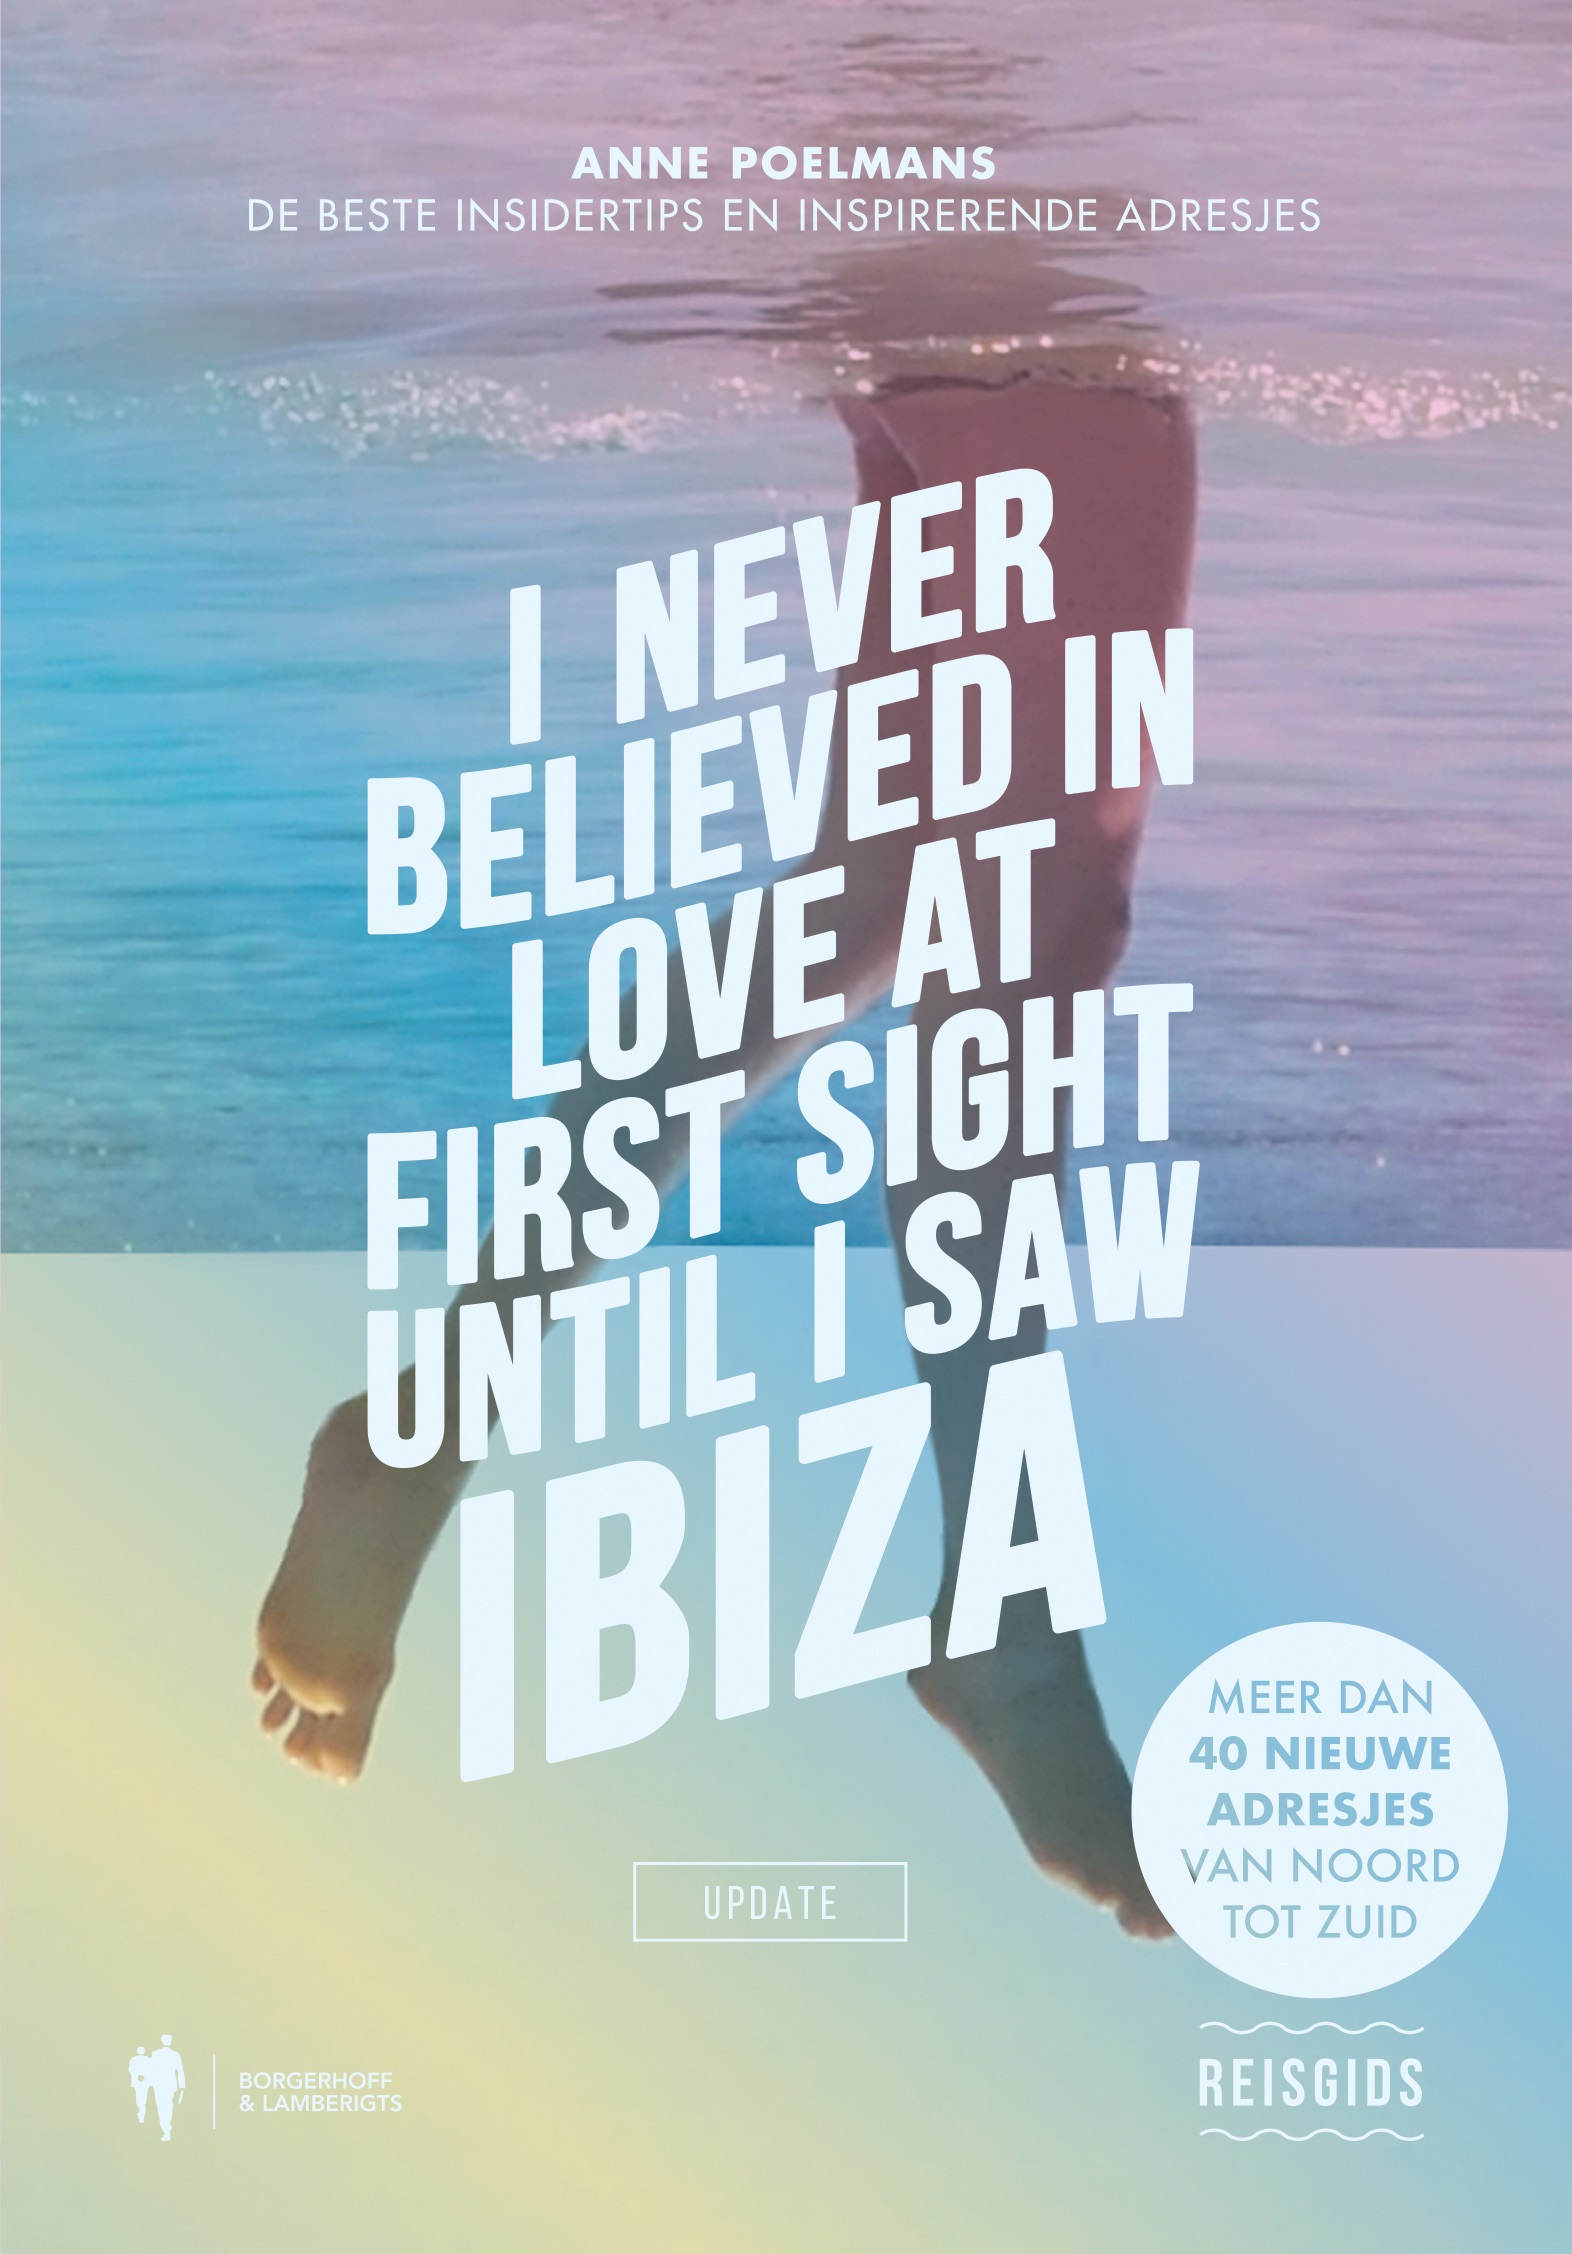 I Never Believed in Love at First Sight until I Saw Ibiza